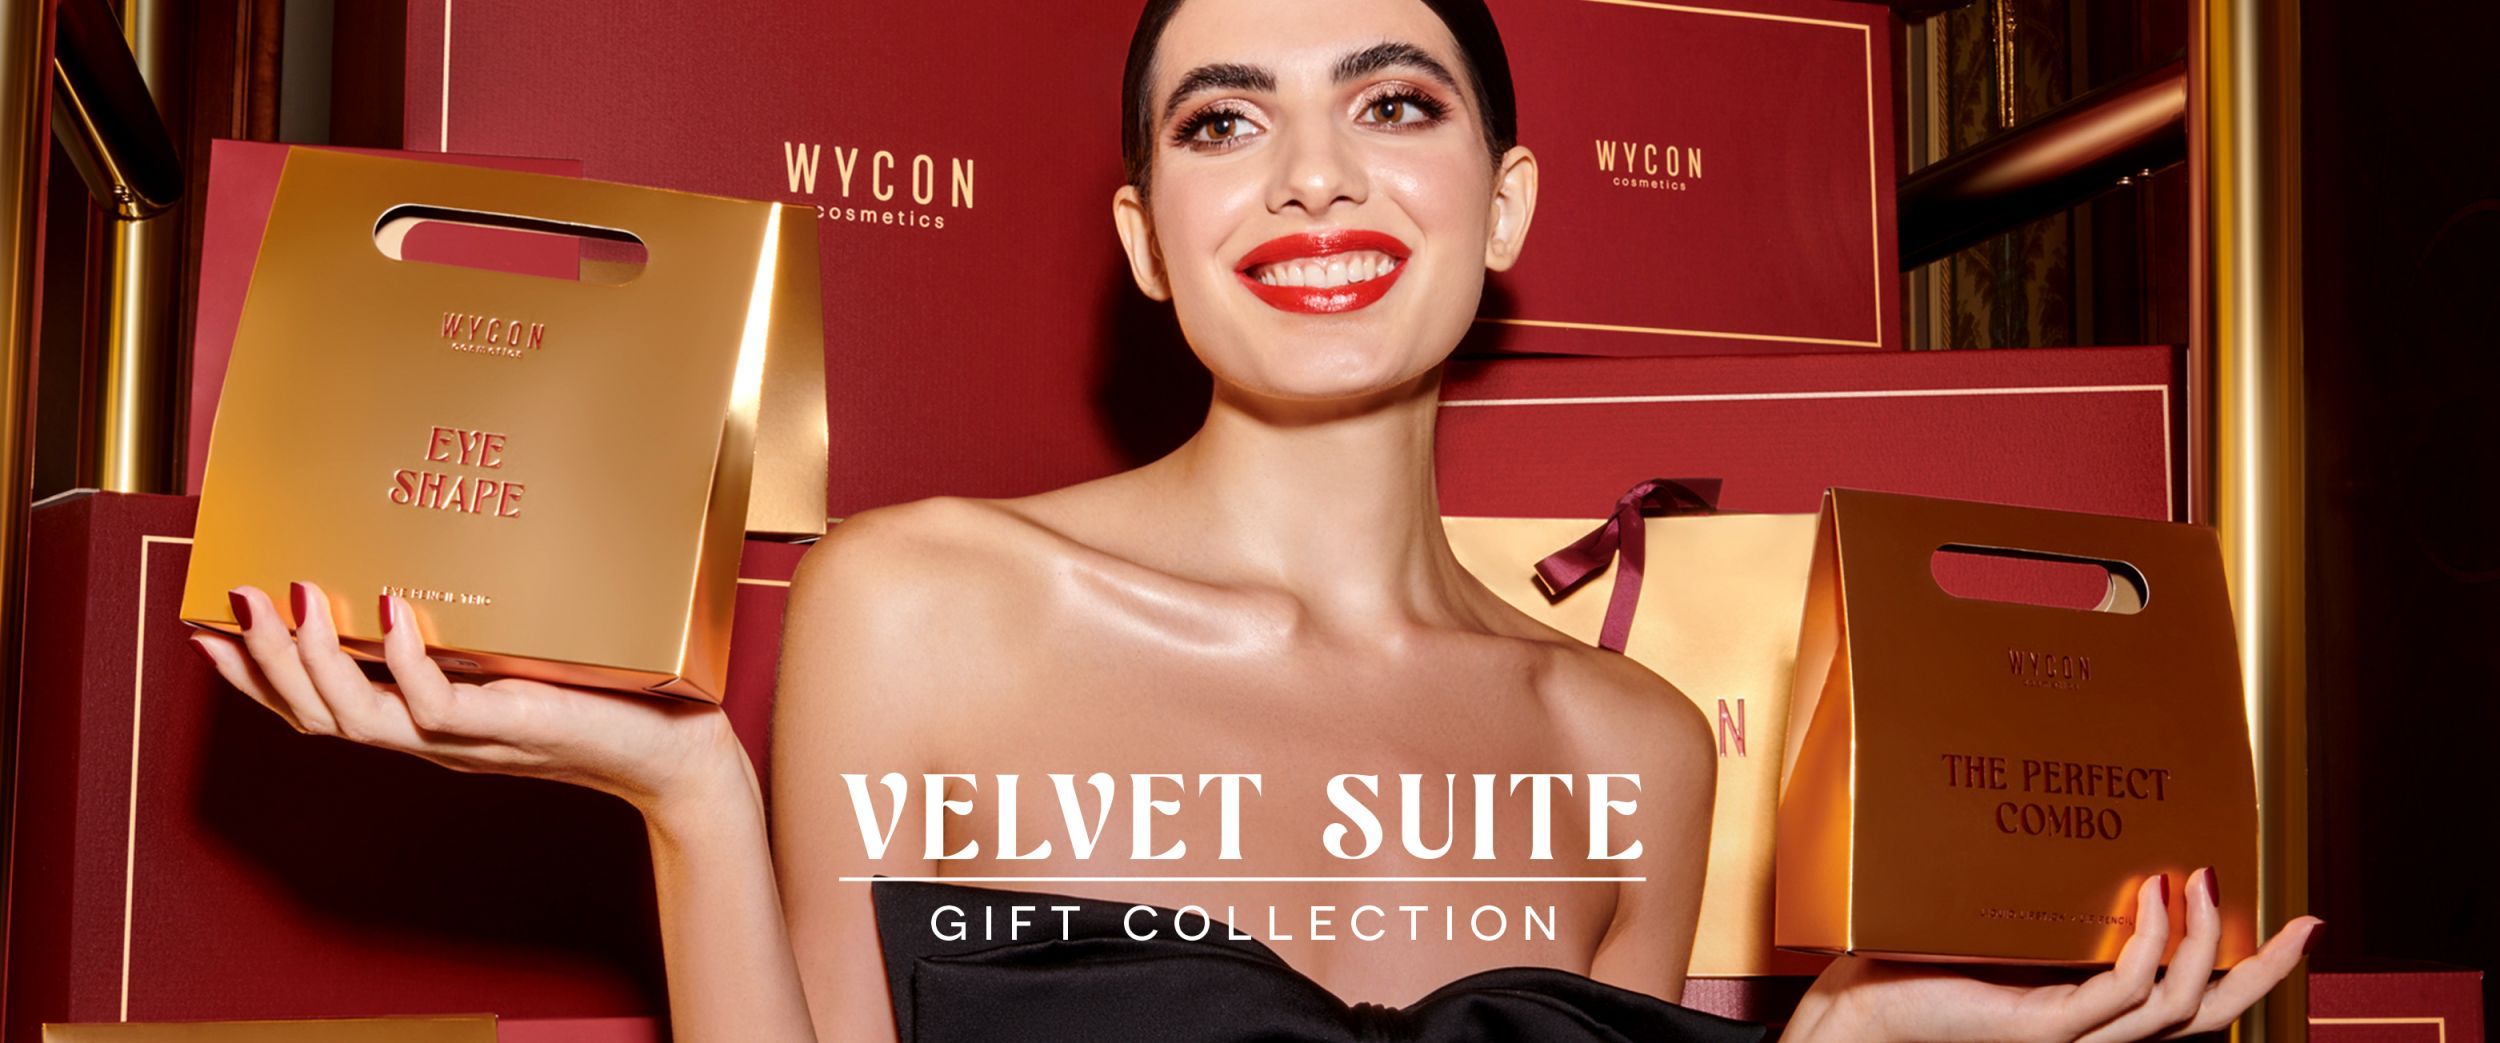 VELVET SUITE GIFT COLLECTION